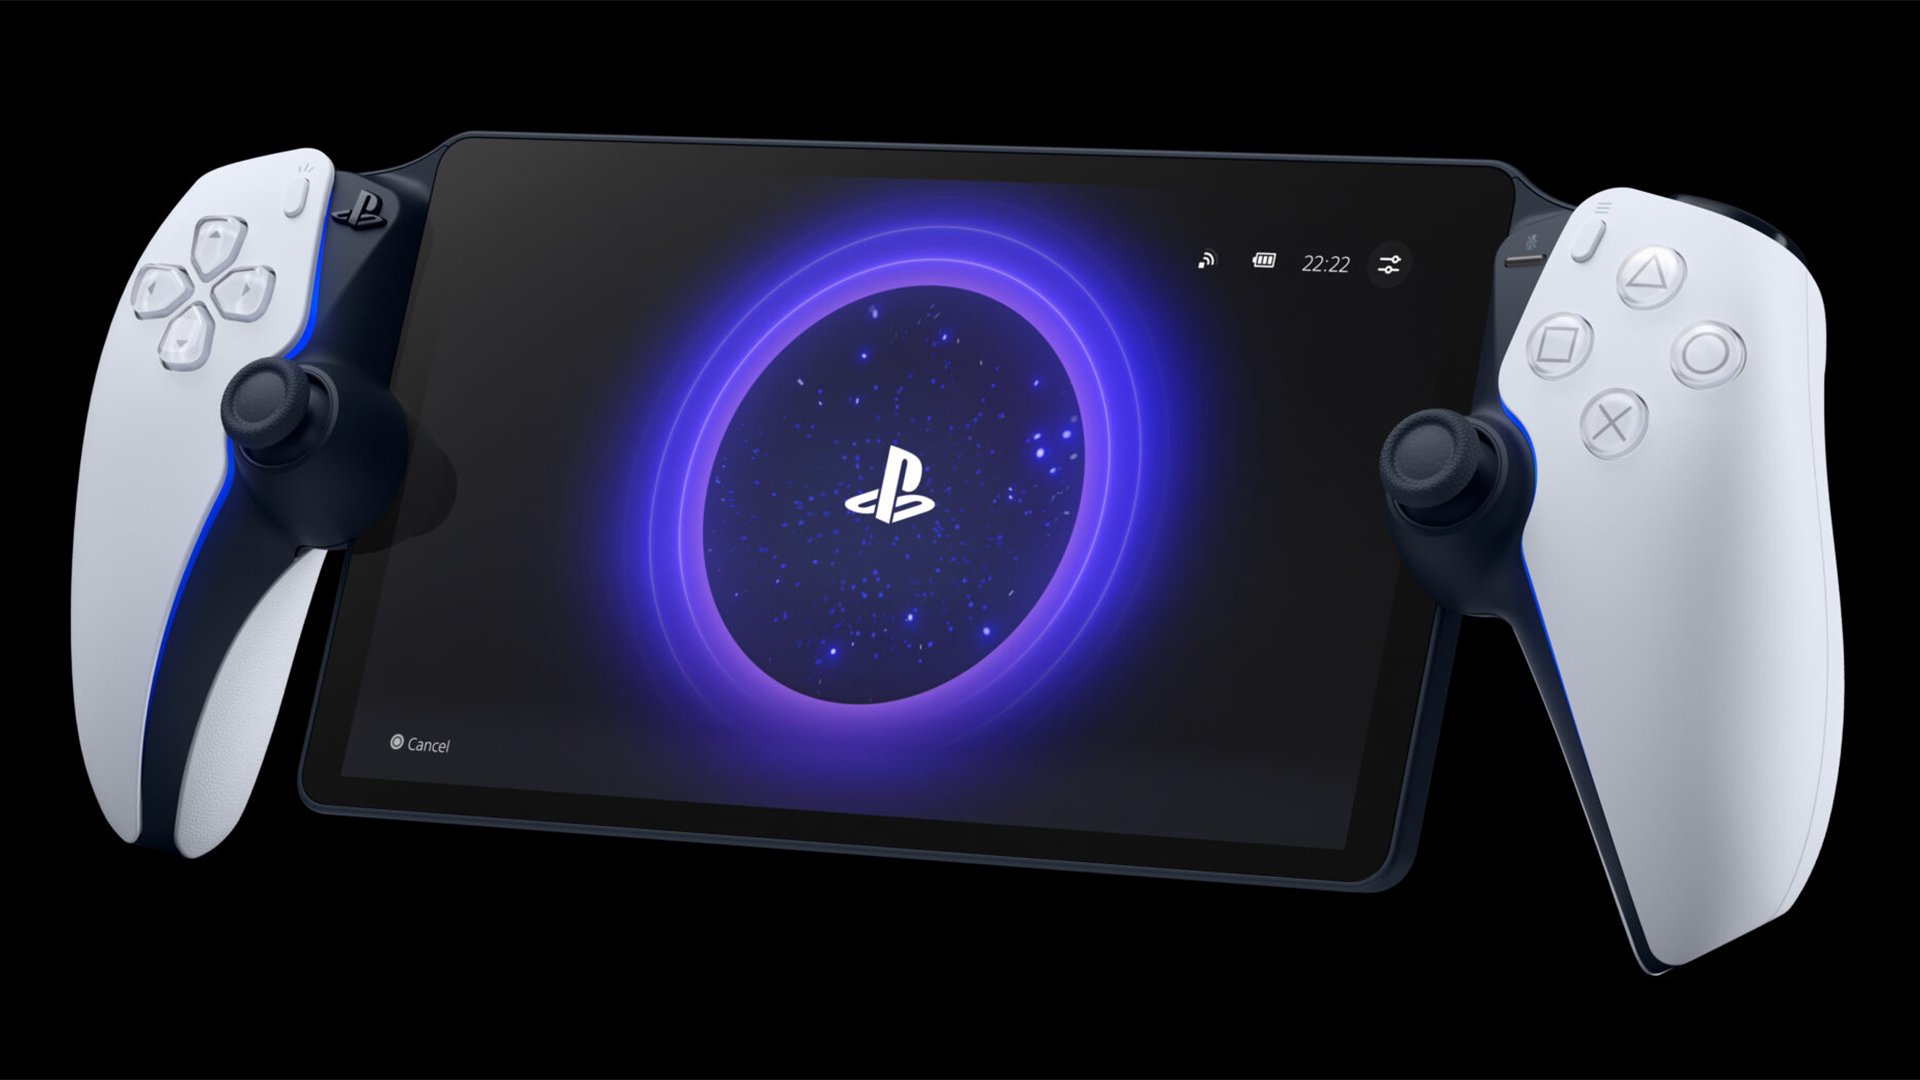 NEW PlayStation Portal Remote Player for PS5 Console Presale Confirmed